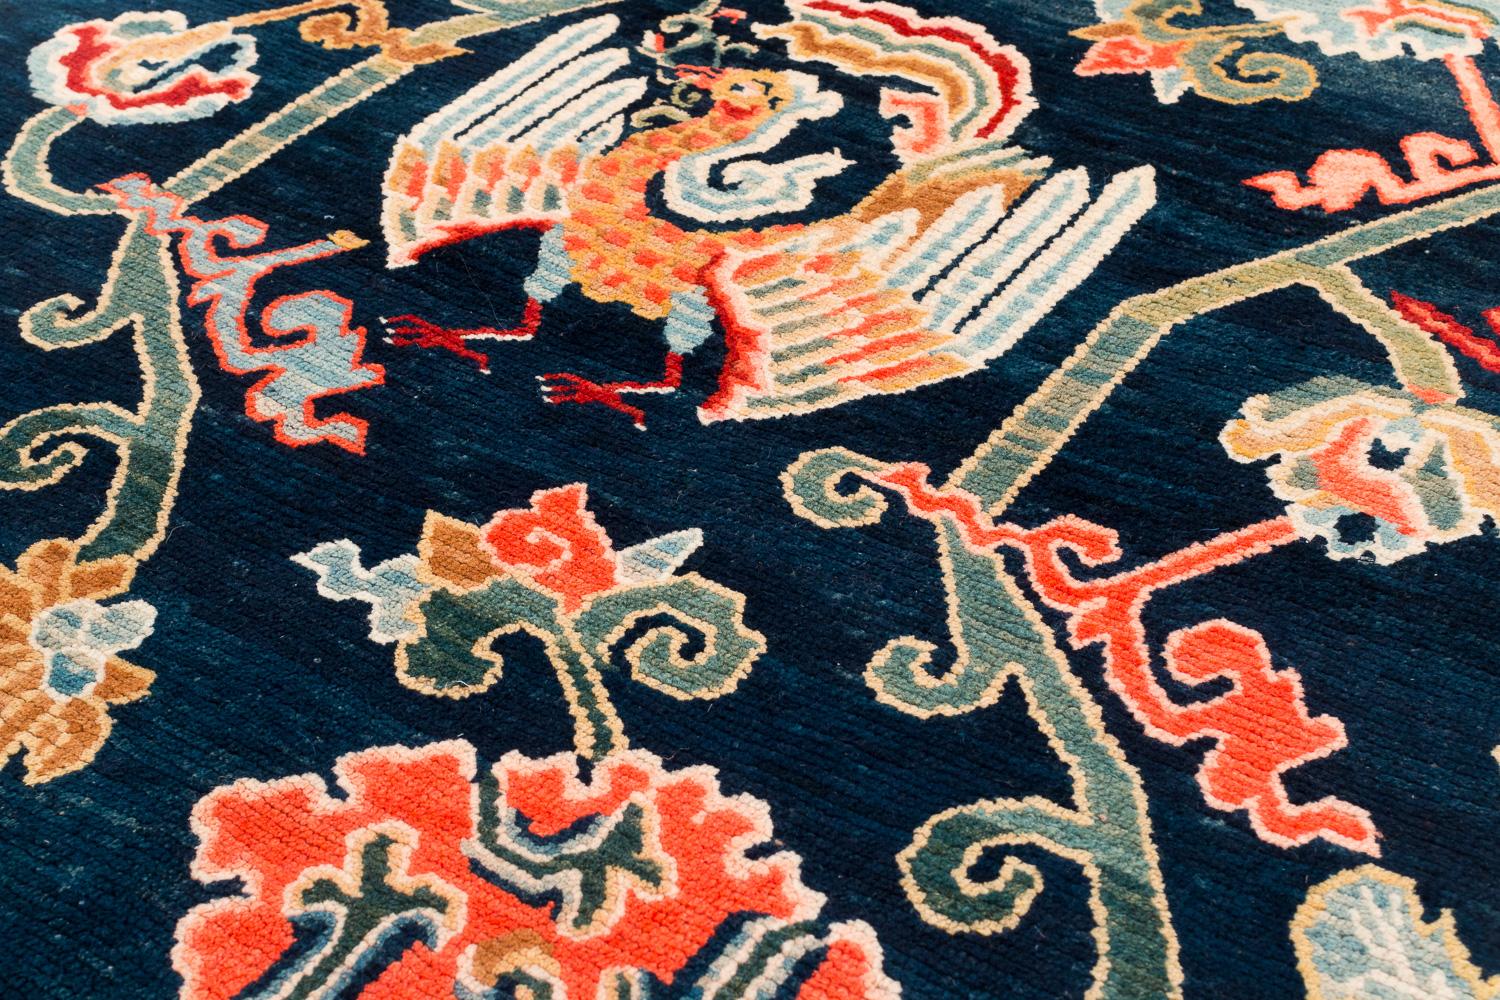 Tibetan Phoenix and Dragon Antique Rug In Excellent Condition For Sale In New York, NY